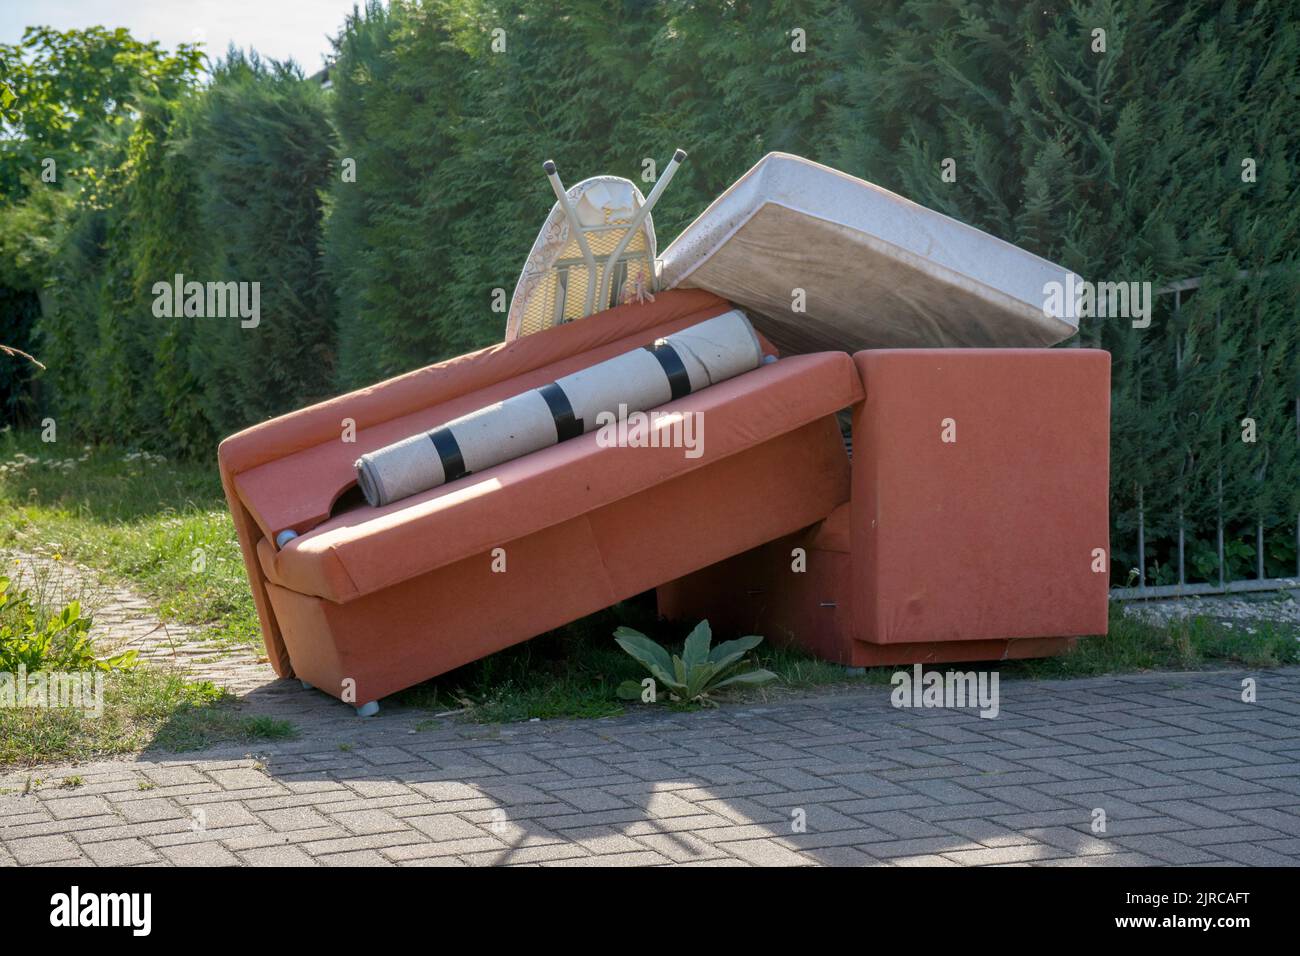 Bulky garbage heap at the roadside with upholstered furniture Stock Photo